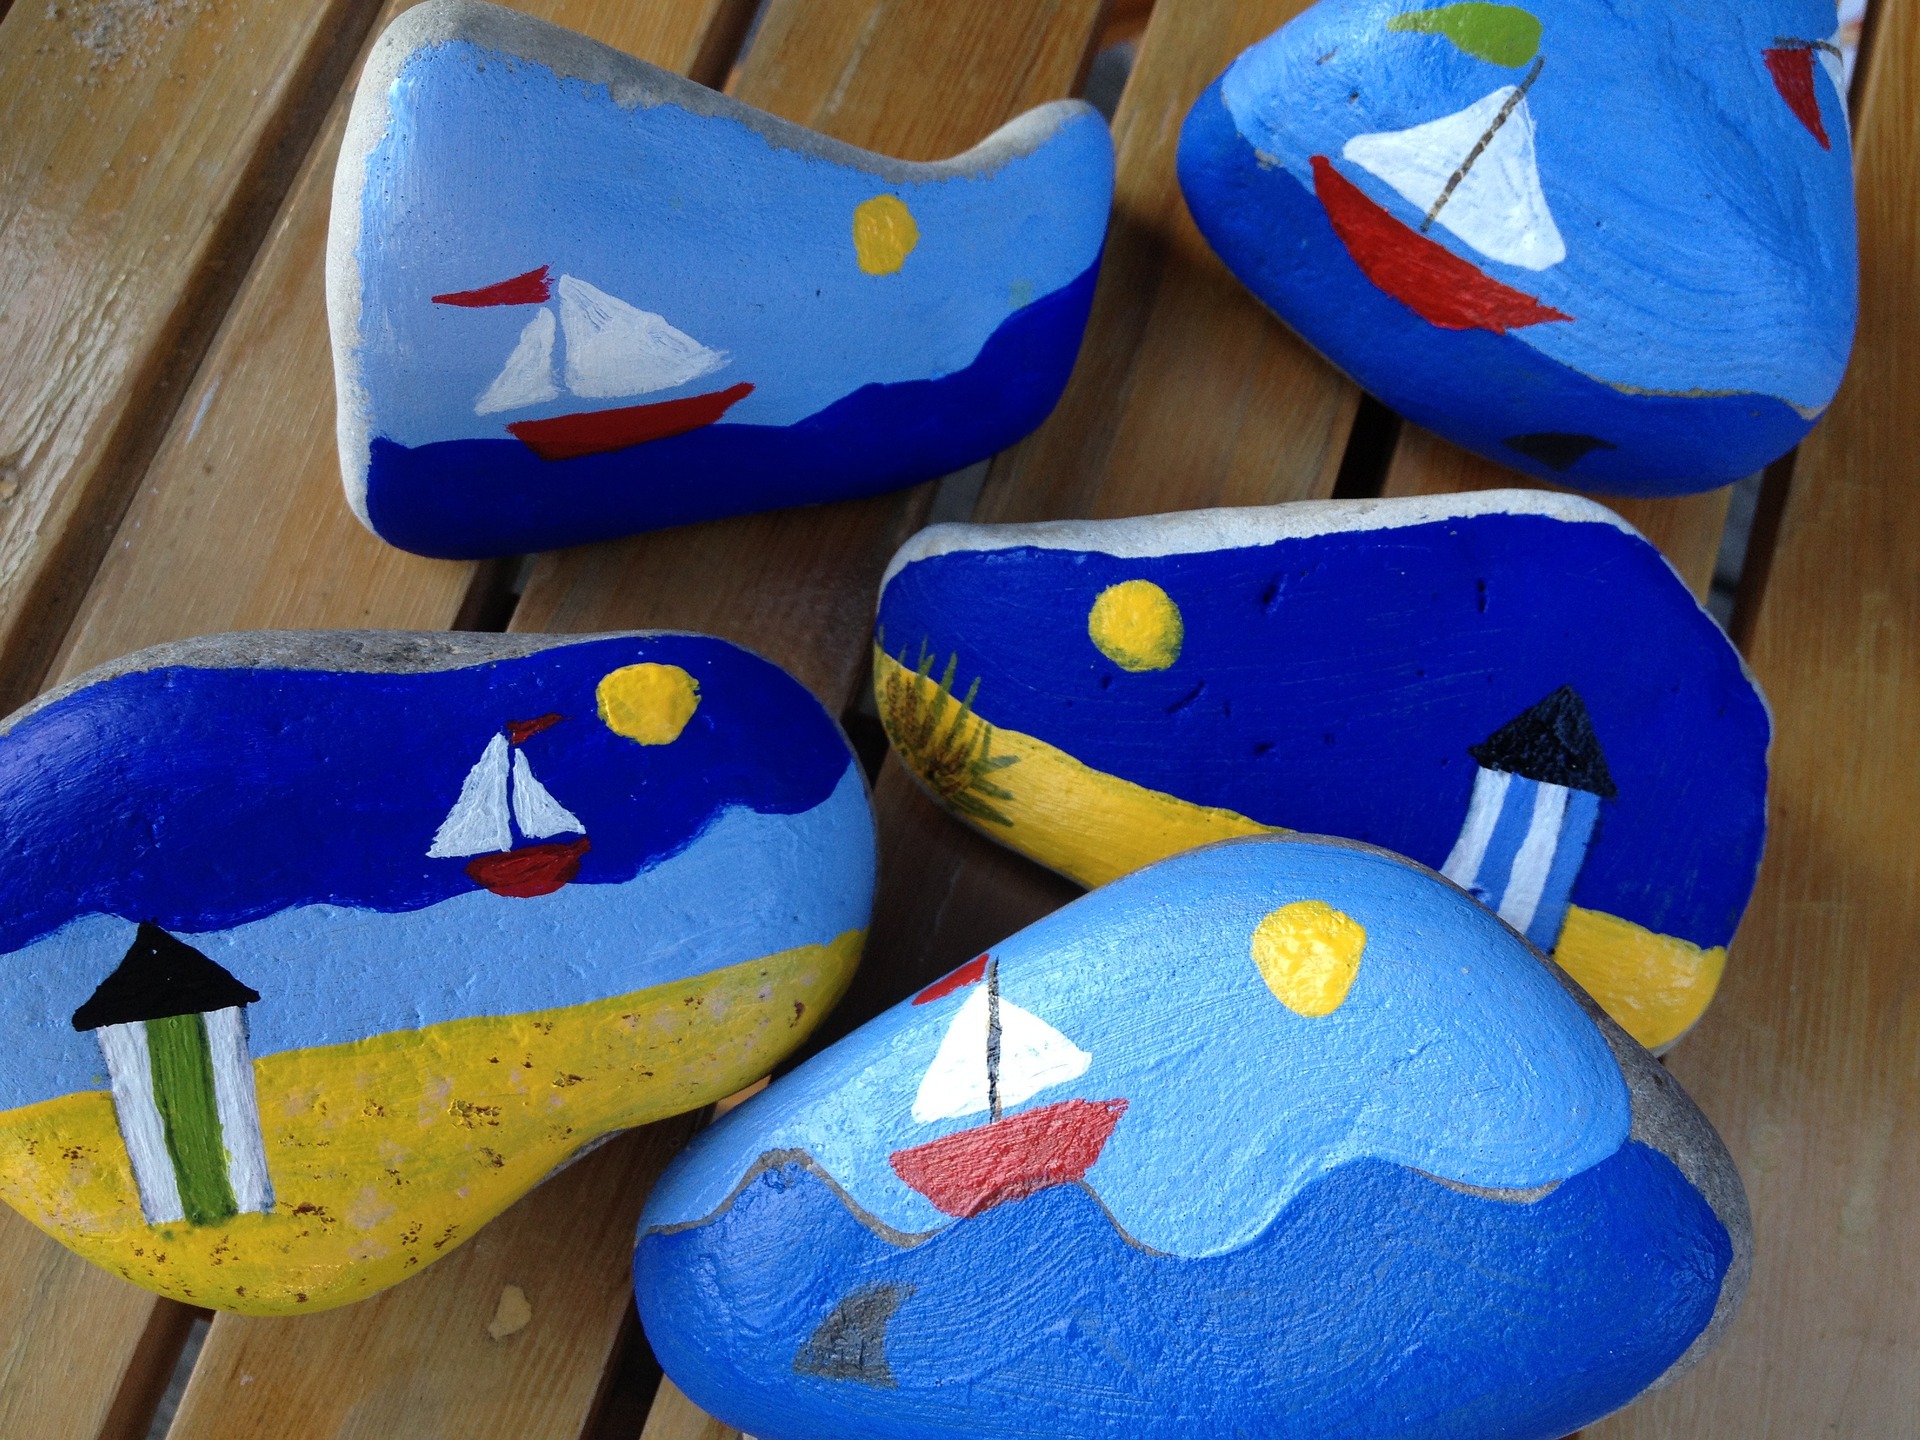 Group of painted rocks